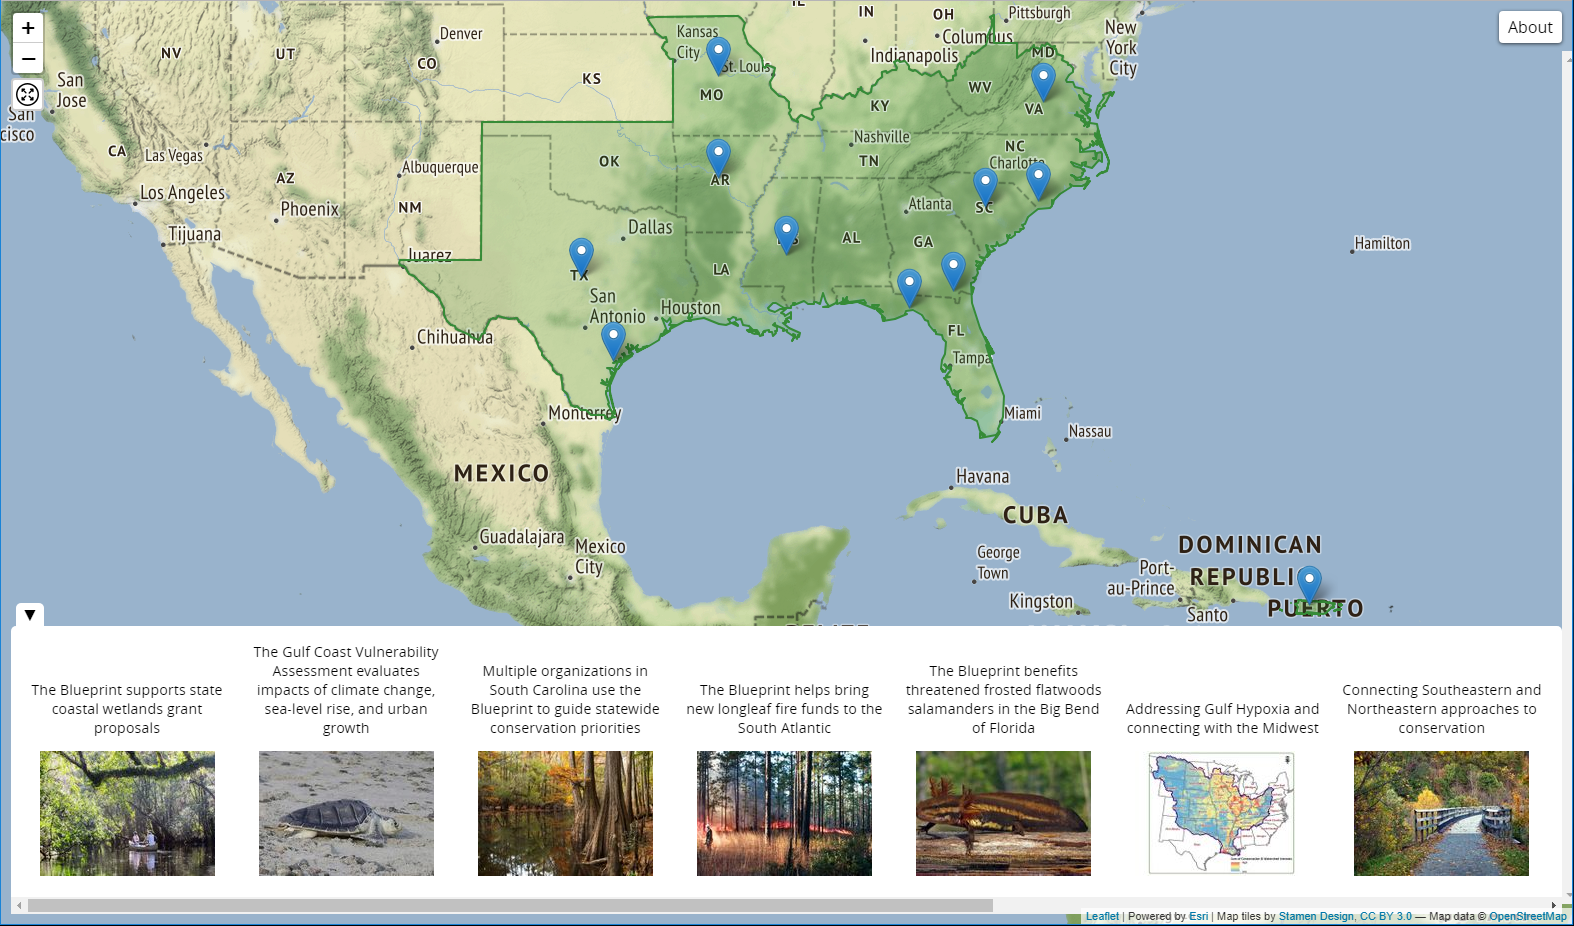 Screenshot of the story map showing the SECAS region highlighted in green, pins for the location of each story, and a bottom menu with a title and thumbnail image for each story.